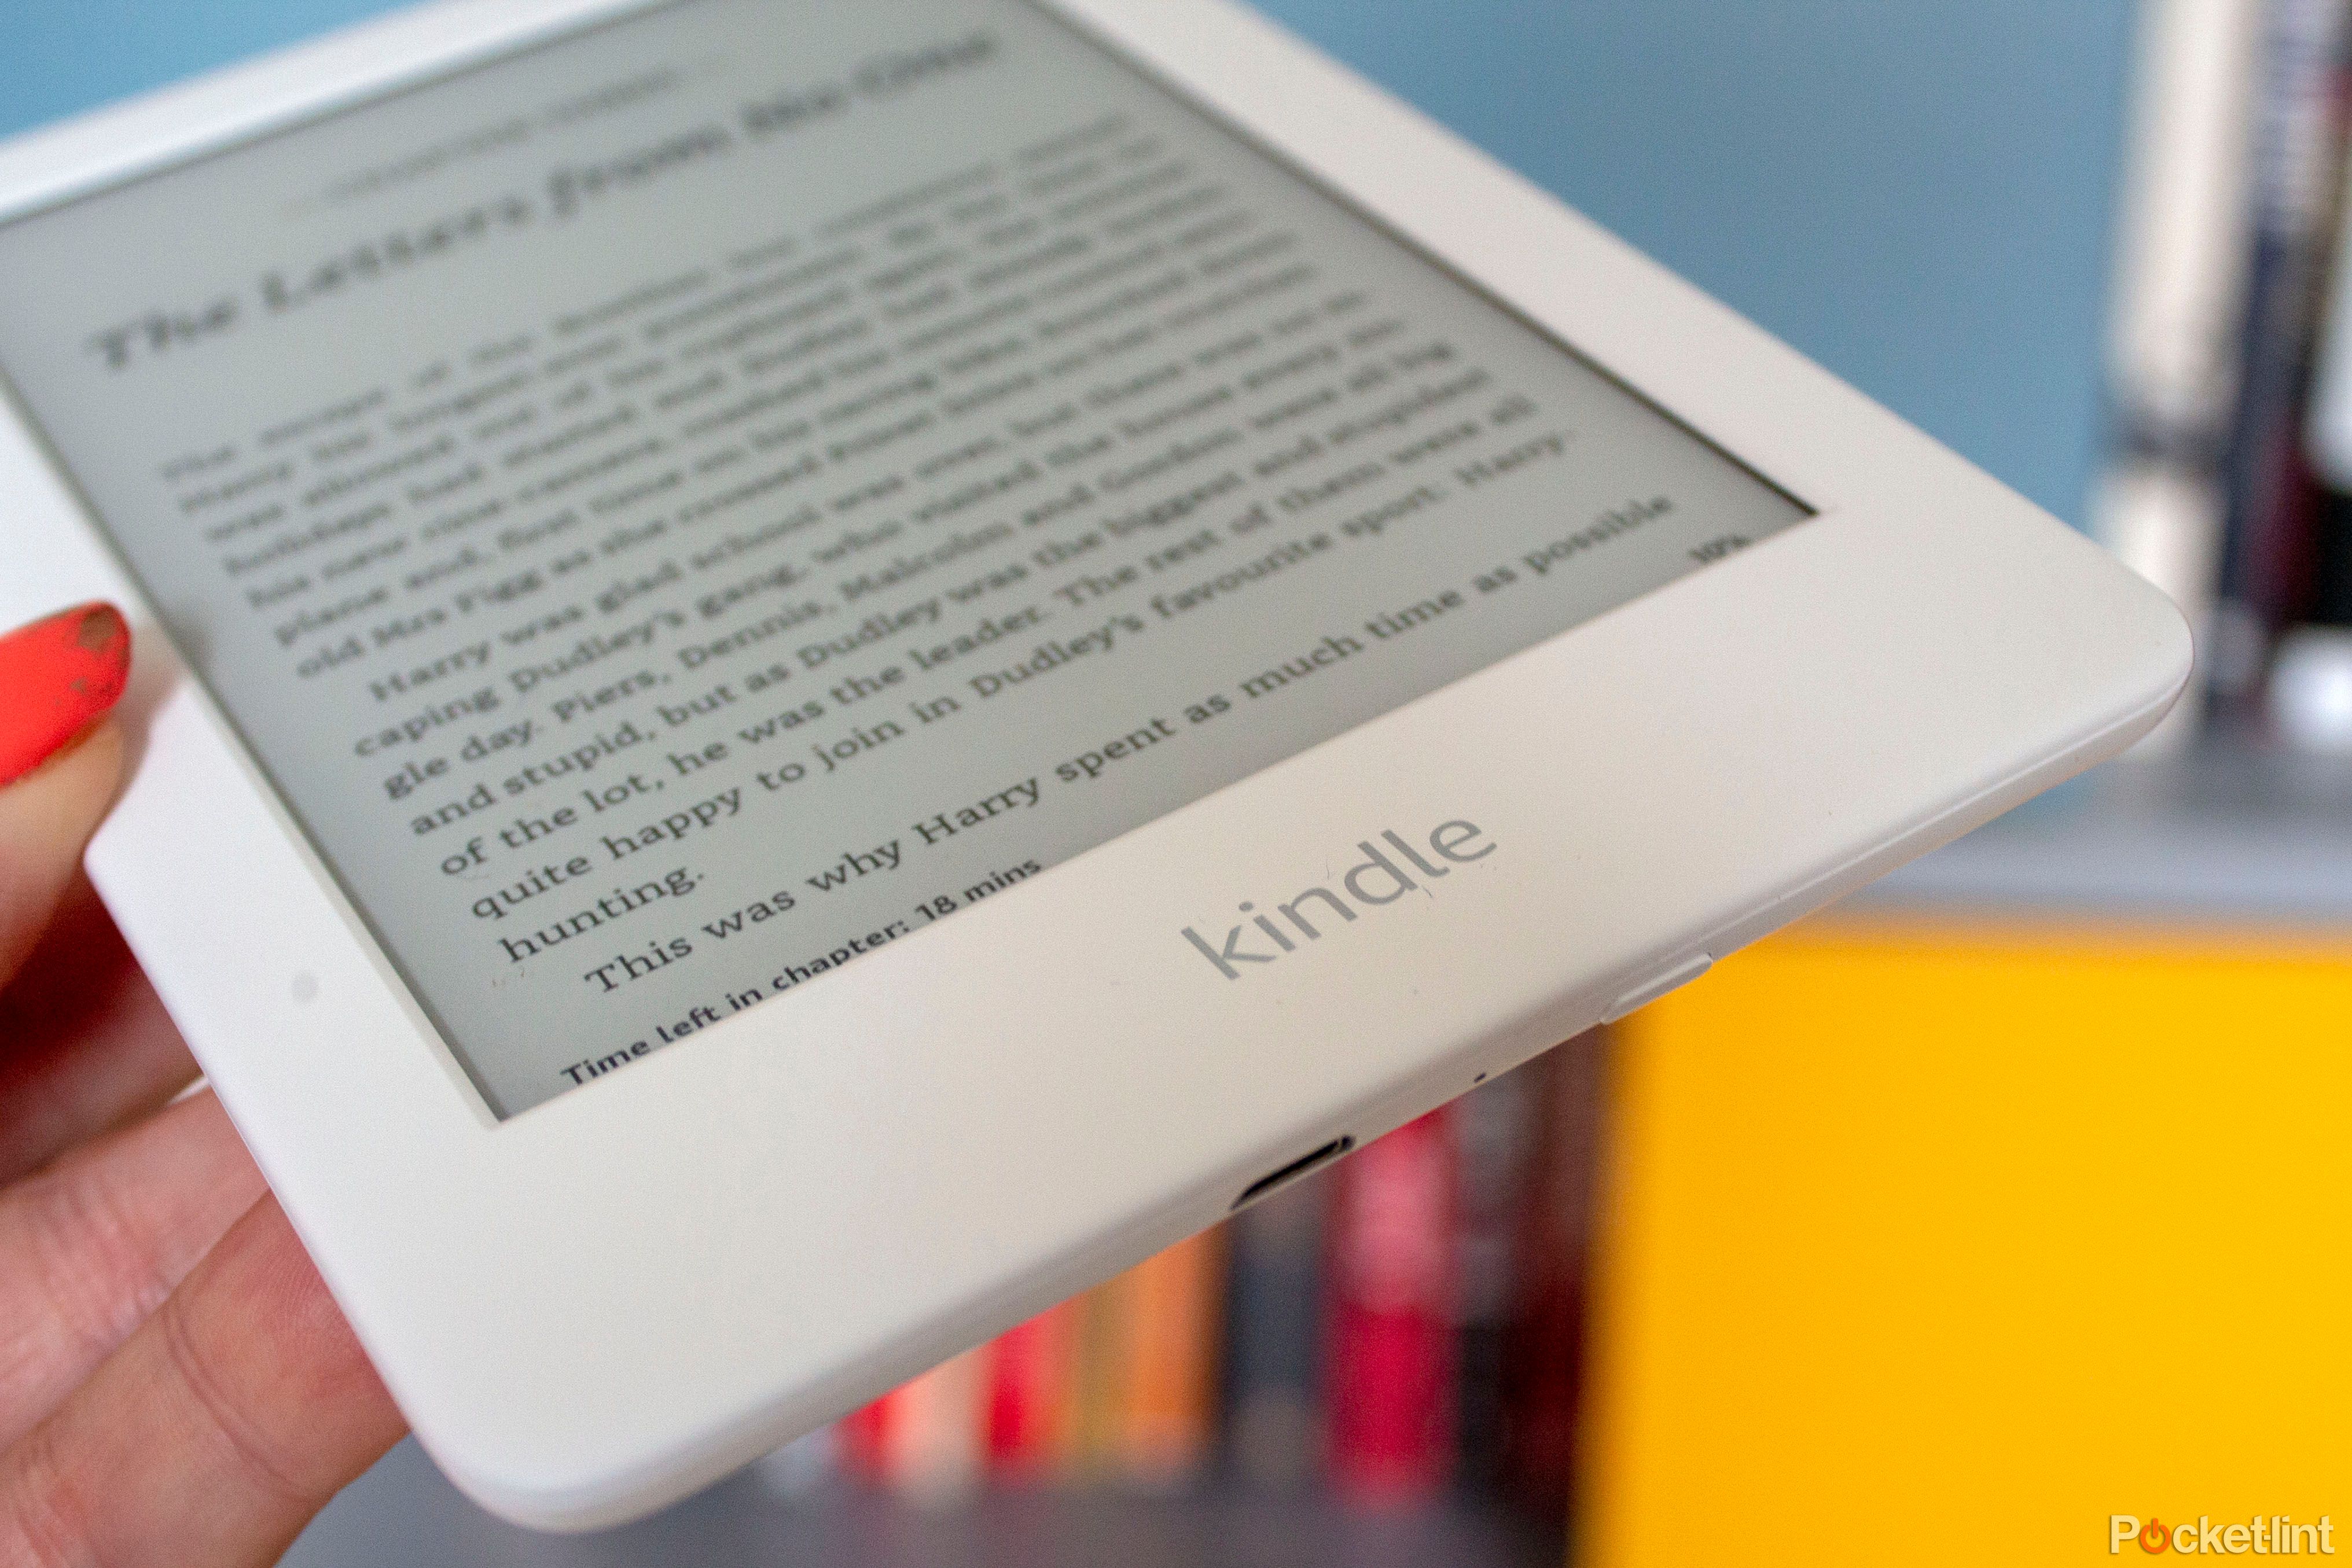 Amazon Kindle 2019 review images image 11